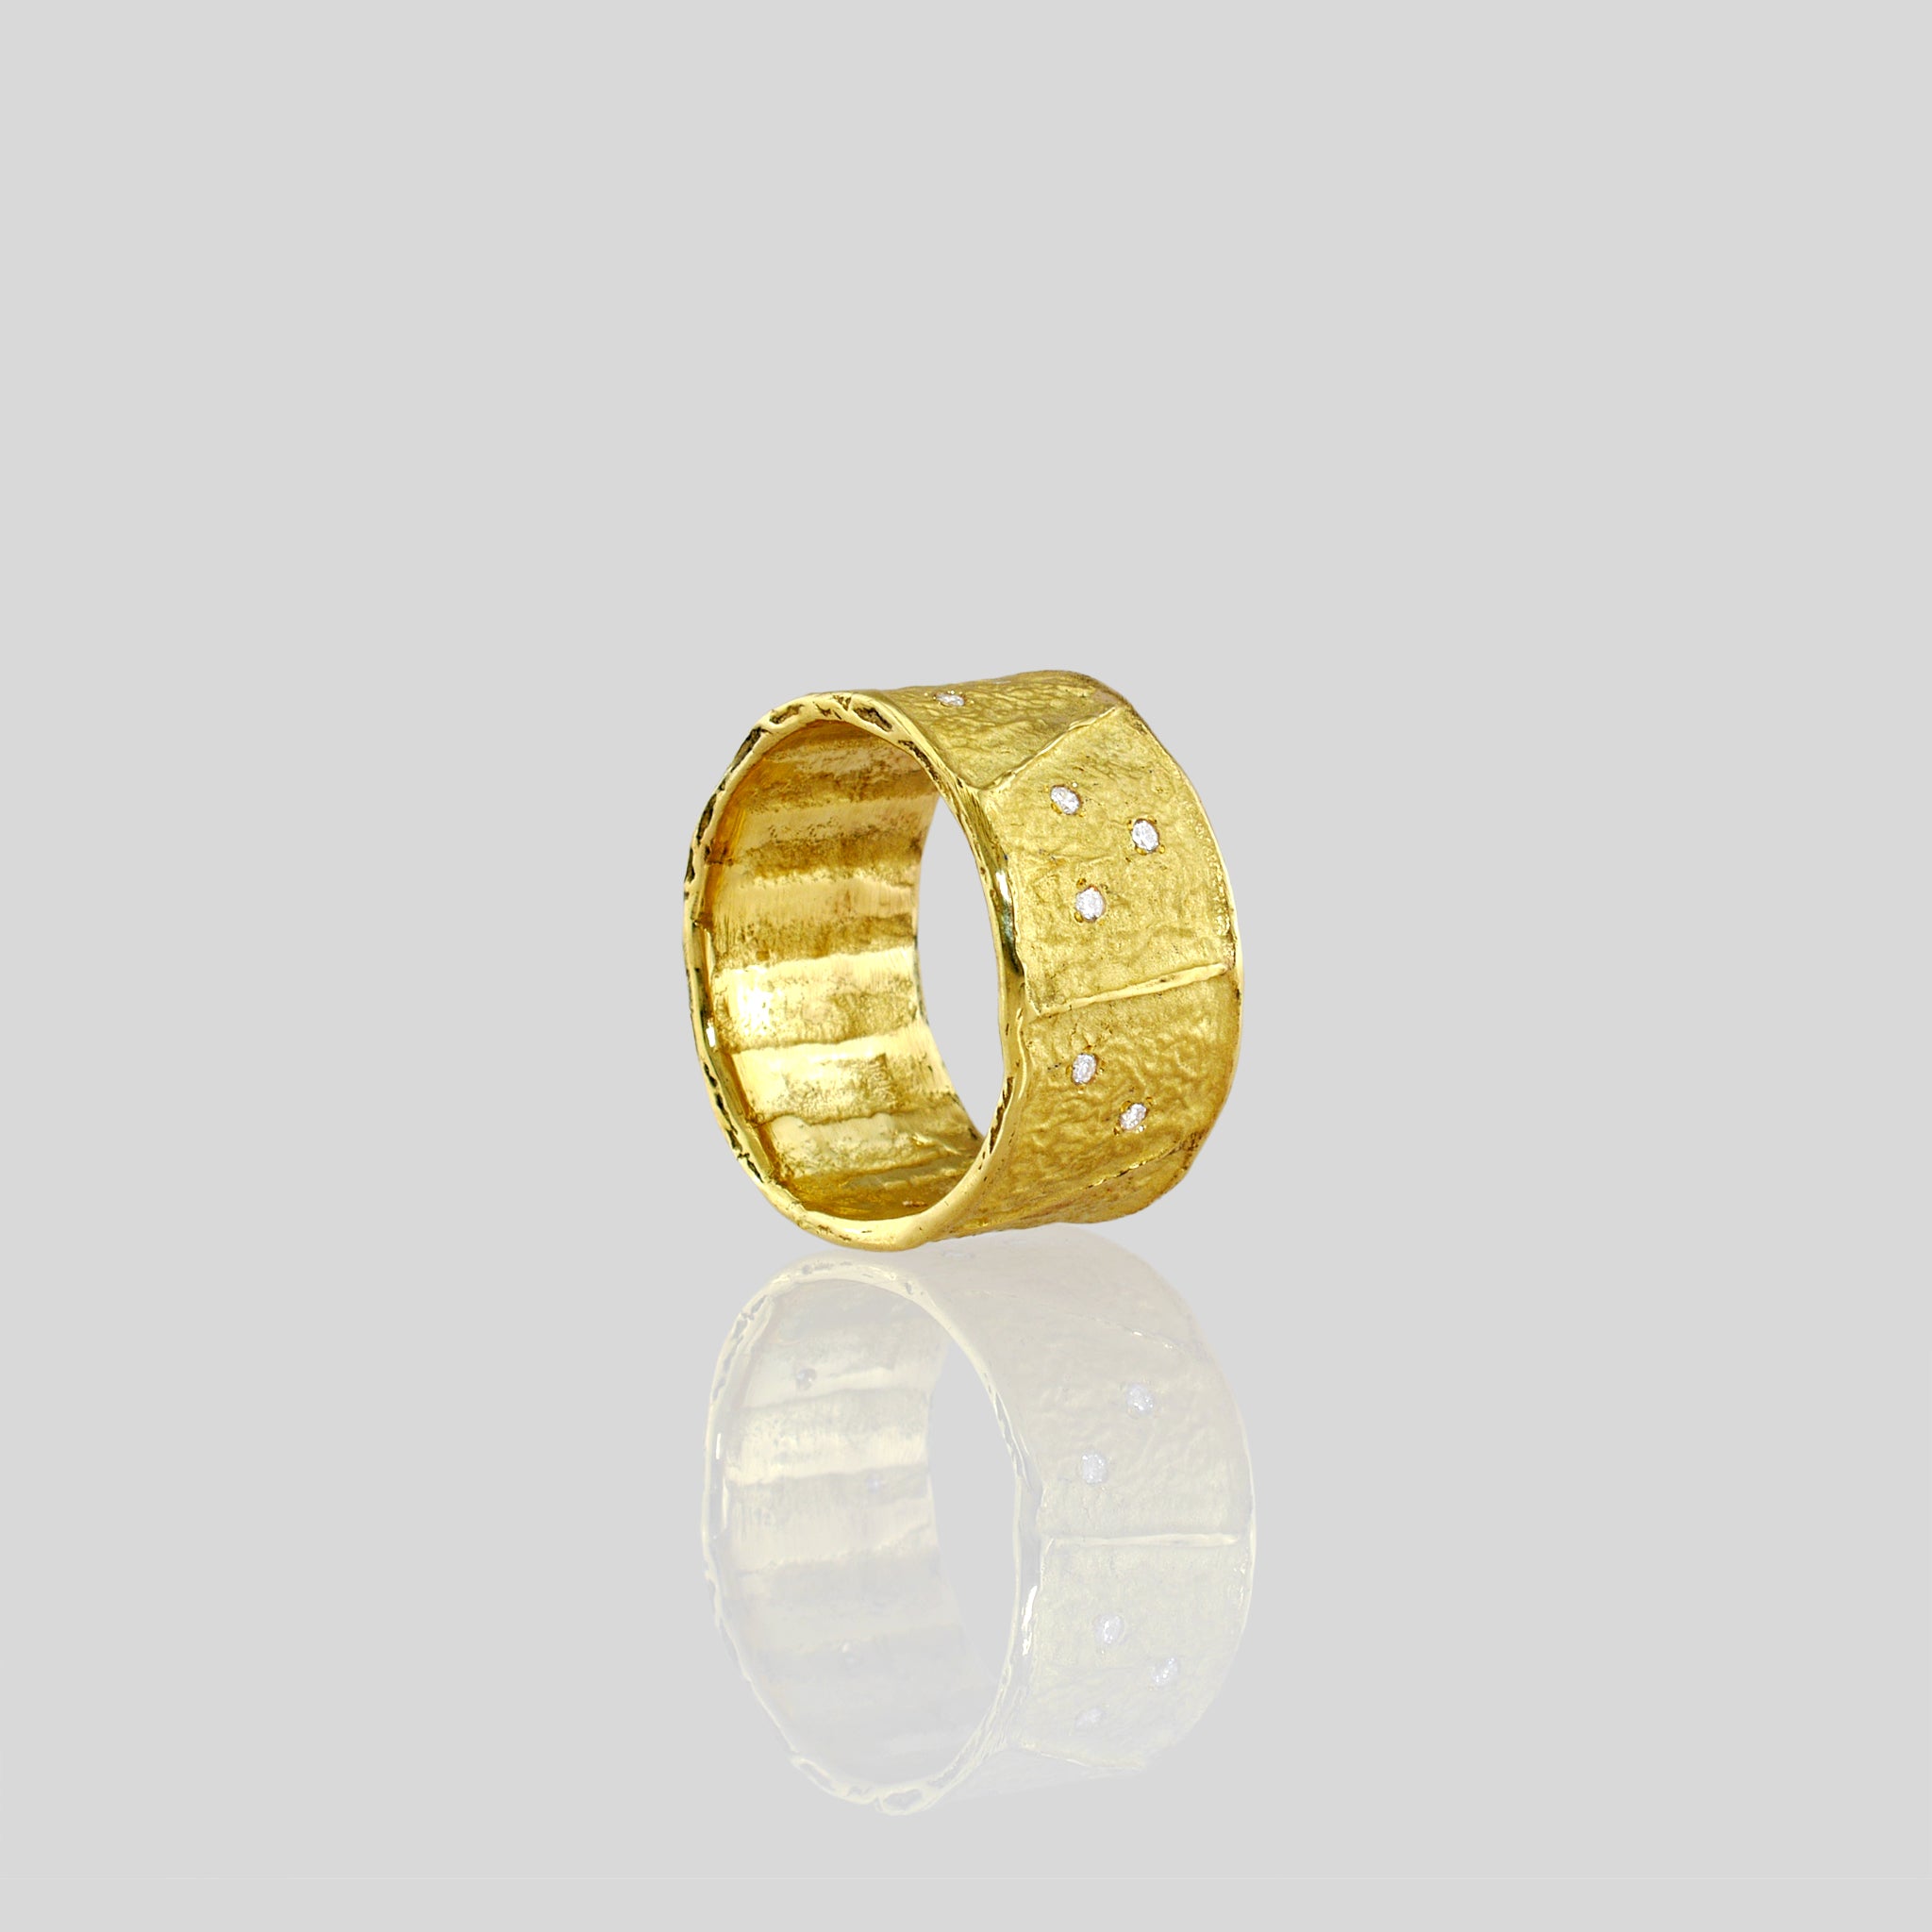 A stunning 18k Yellow Gold Ring featuring a unique wrinkled texture inspired by ancient Egyptian artistry, elegantly adorned with tiny sparkling diamonds for a timeless charm.